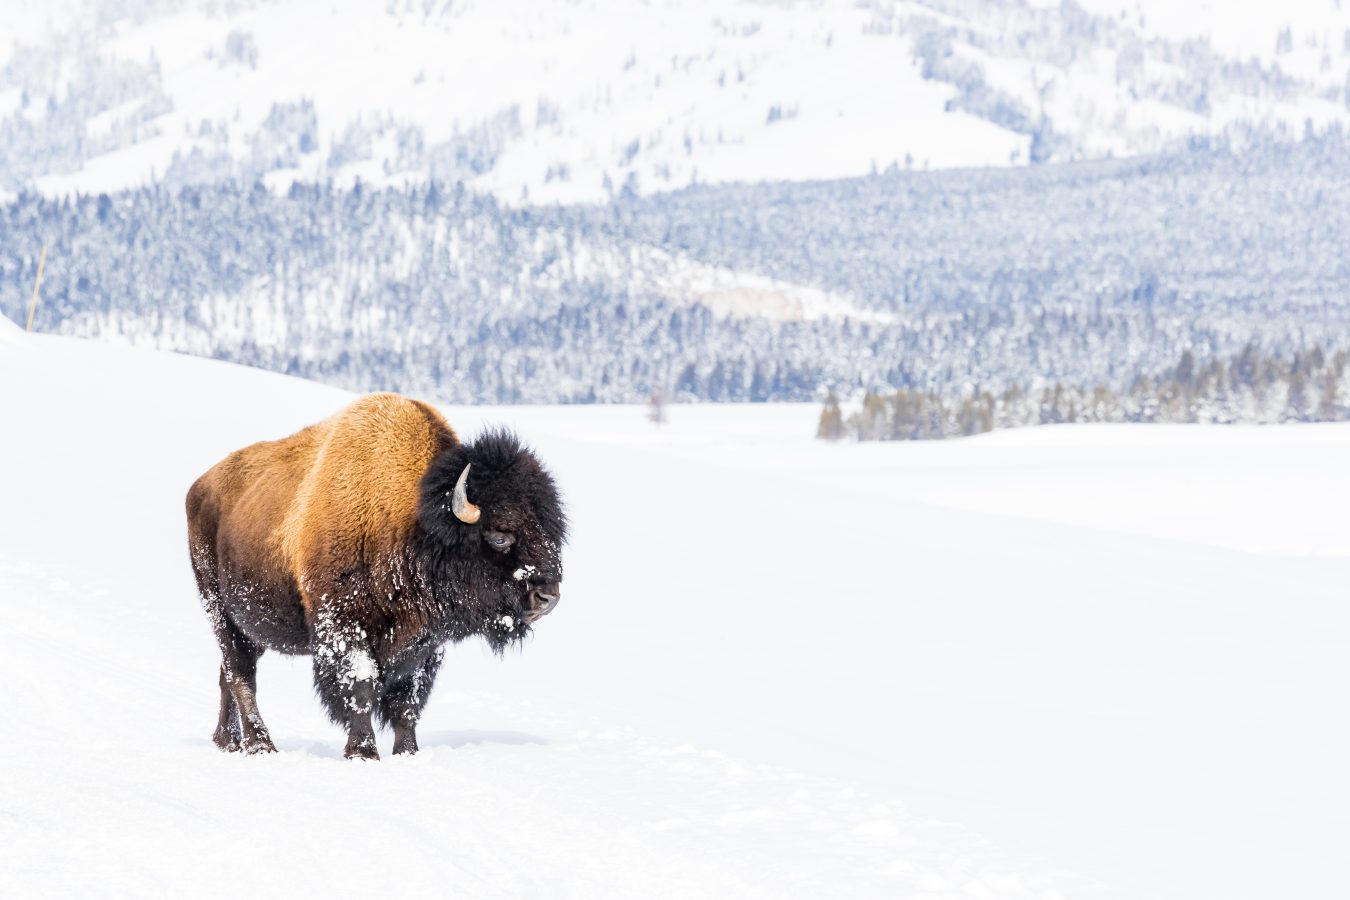 Snowy bison covered in snow in Yellowstone National Park